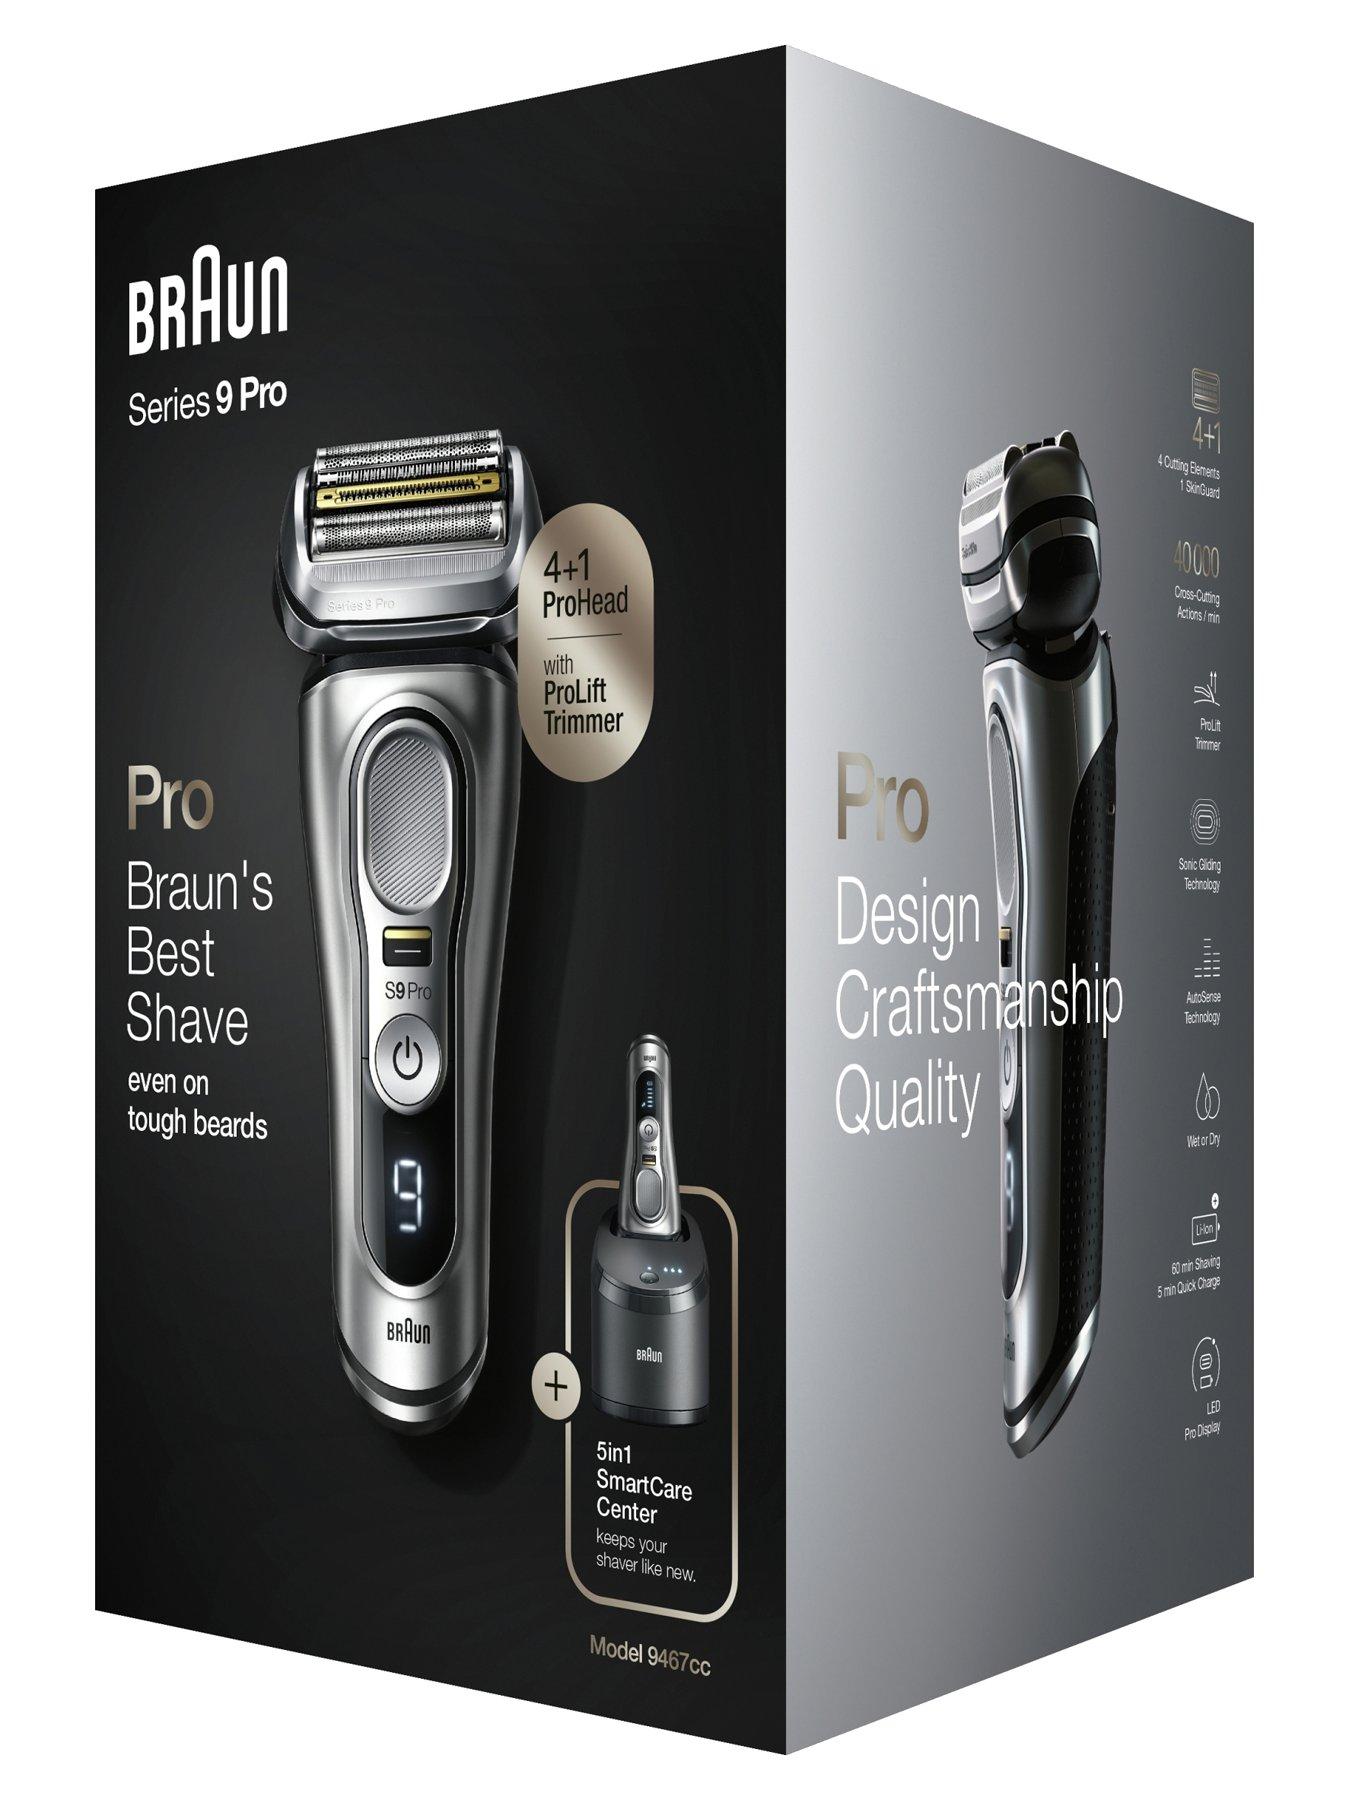 Braun Electric Razor for Men, Waterproof Foil Shaver, Series 9 9390cc, Wet  & Dry Shave, With Pop-Up Beard Trimmer for Grooming, Cleaning & Charging  SmartCare Center and Leather Travel Case, Silver